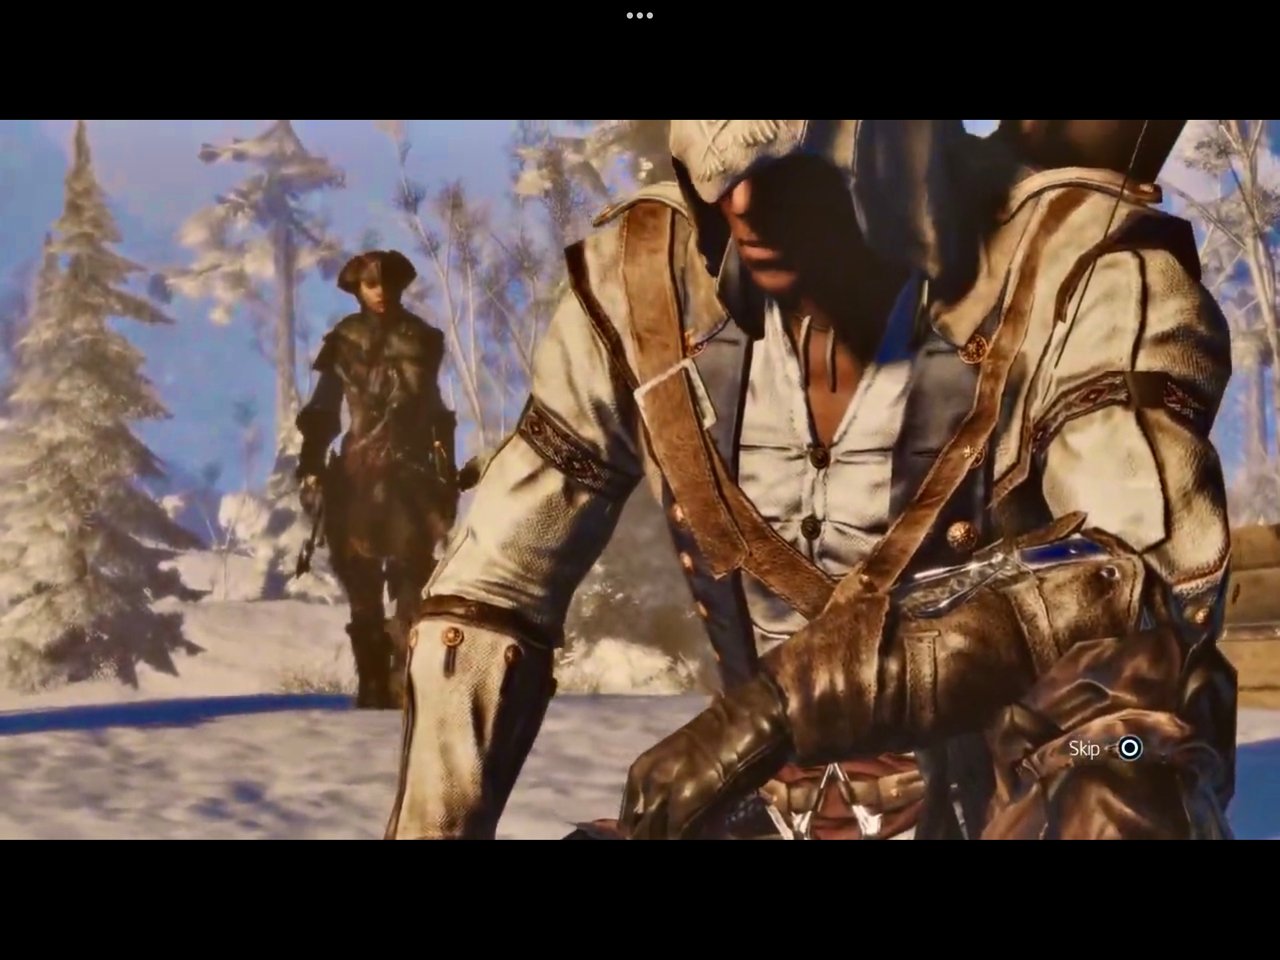 Assassin's Creed III Liberation Outed